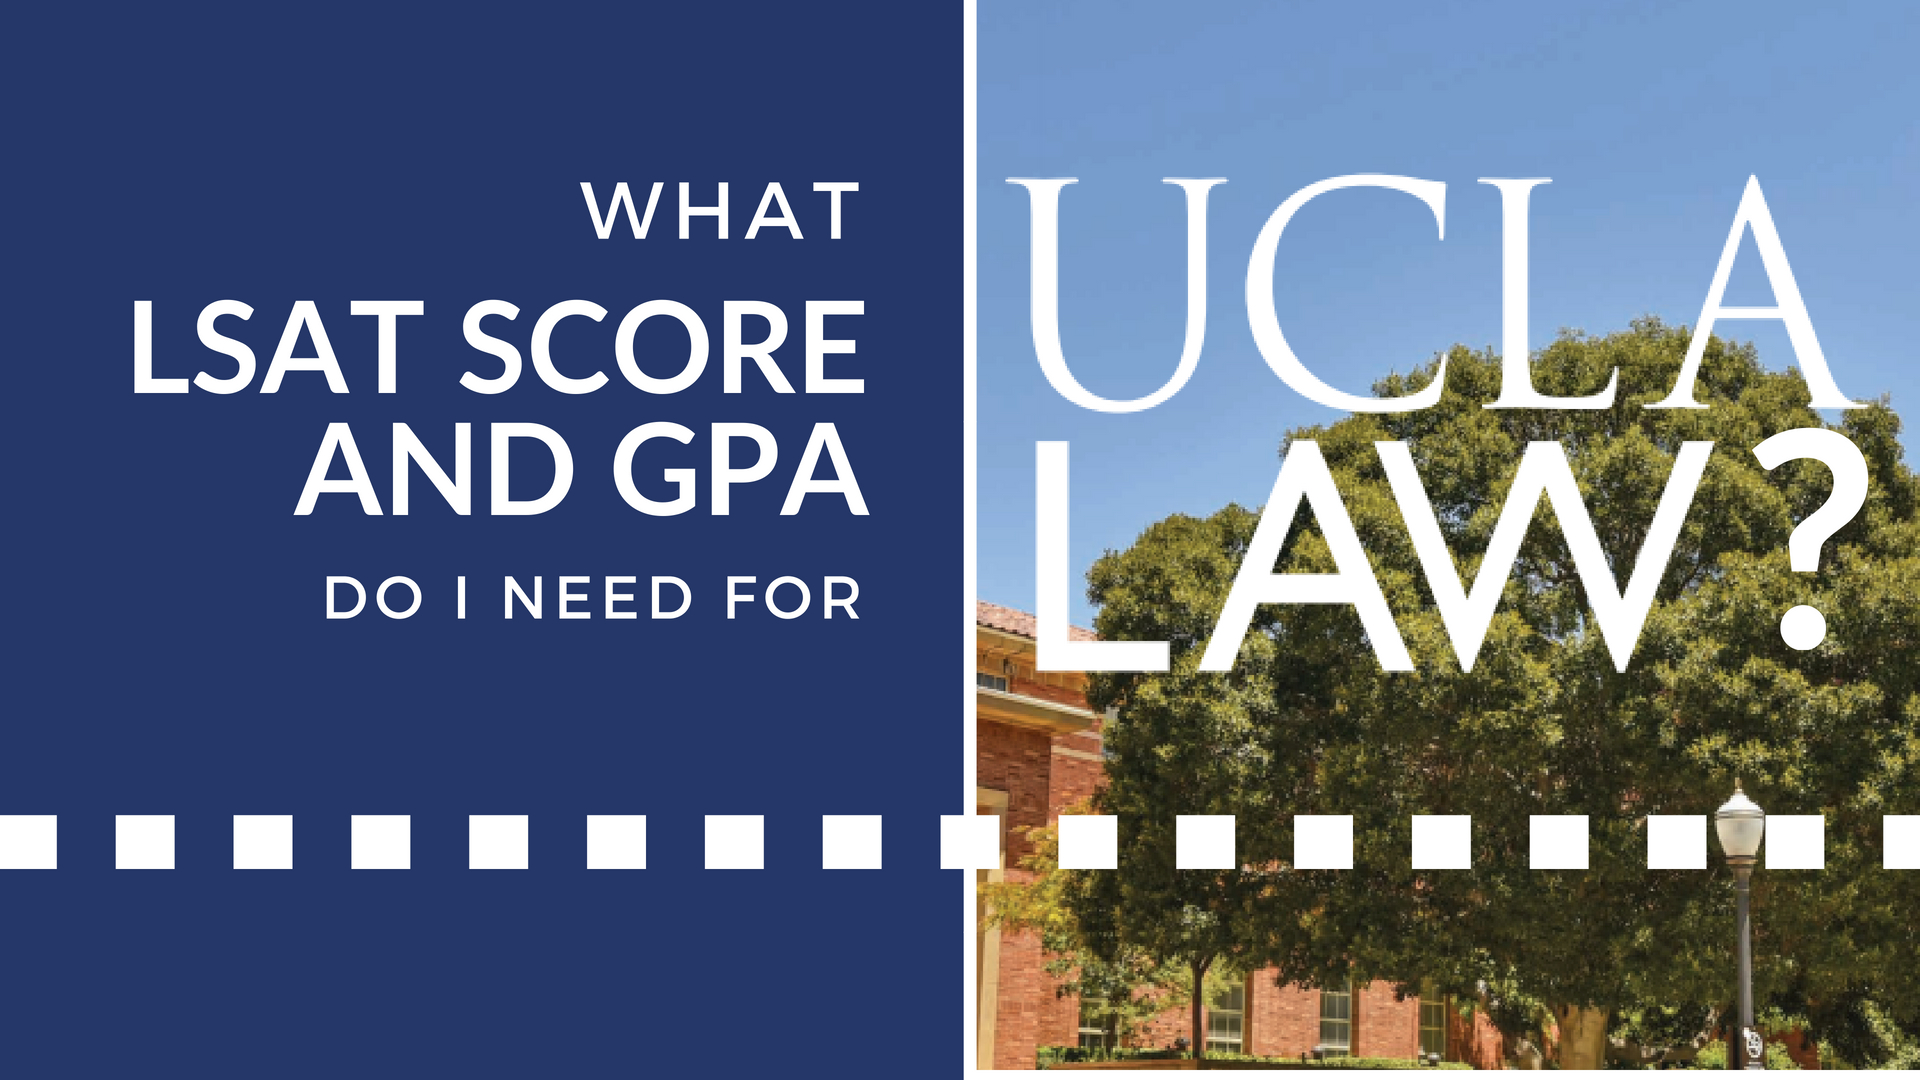 What LSAT and GPA do you need for UCLA Law? LawSchooli